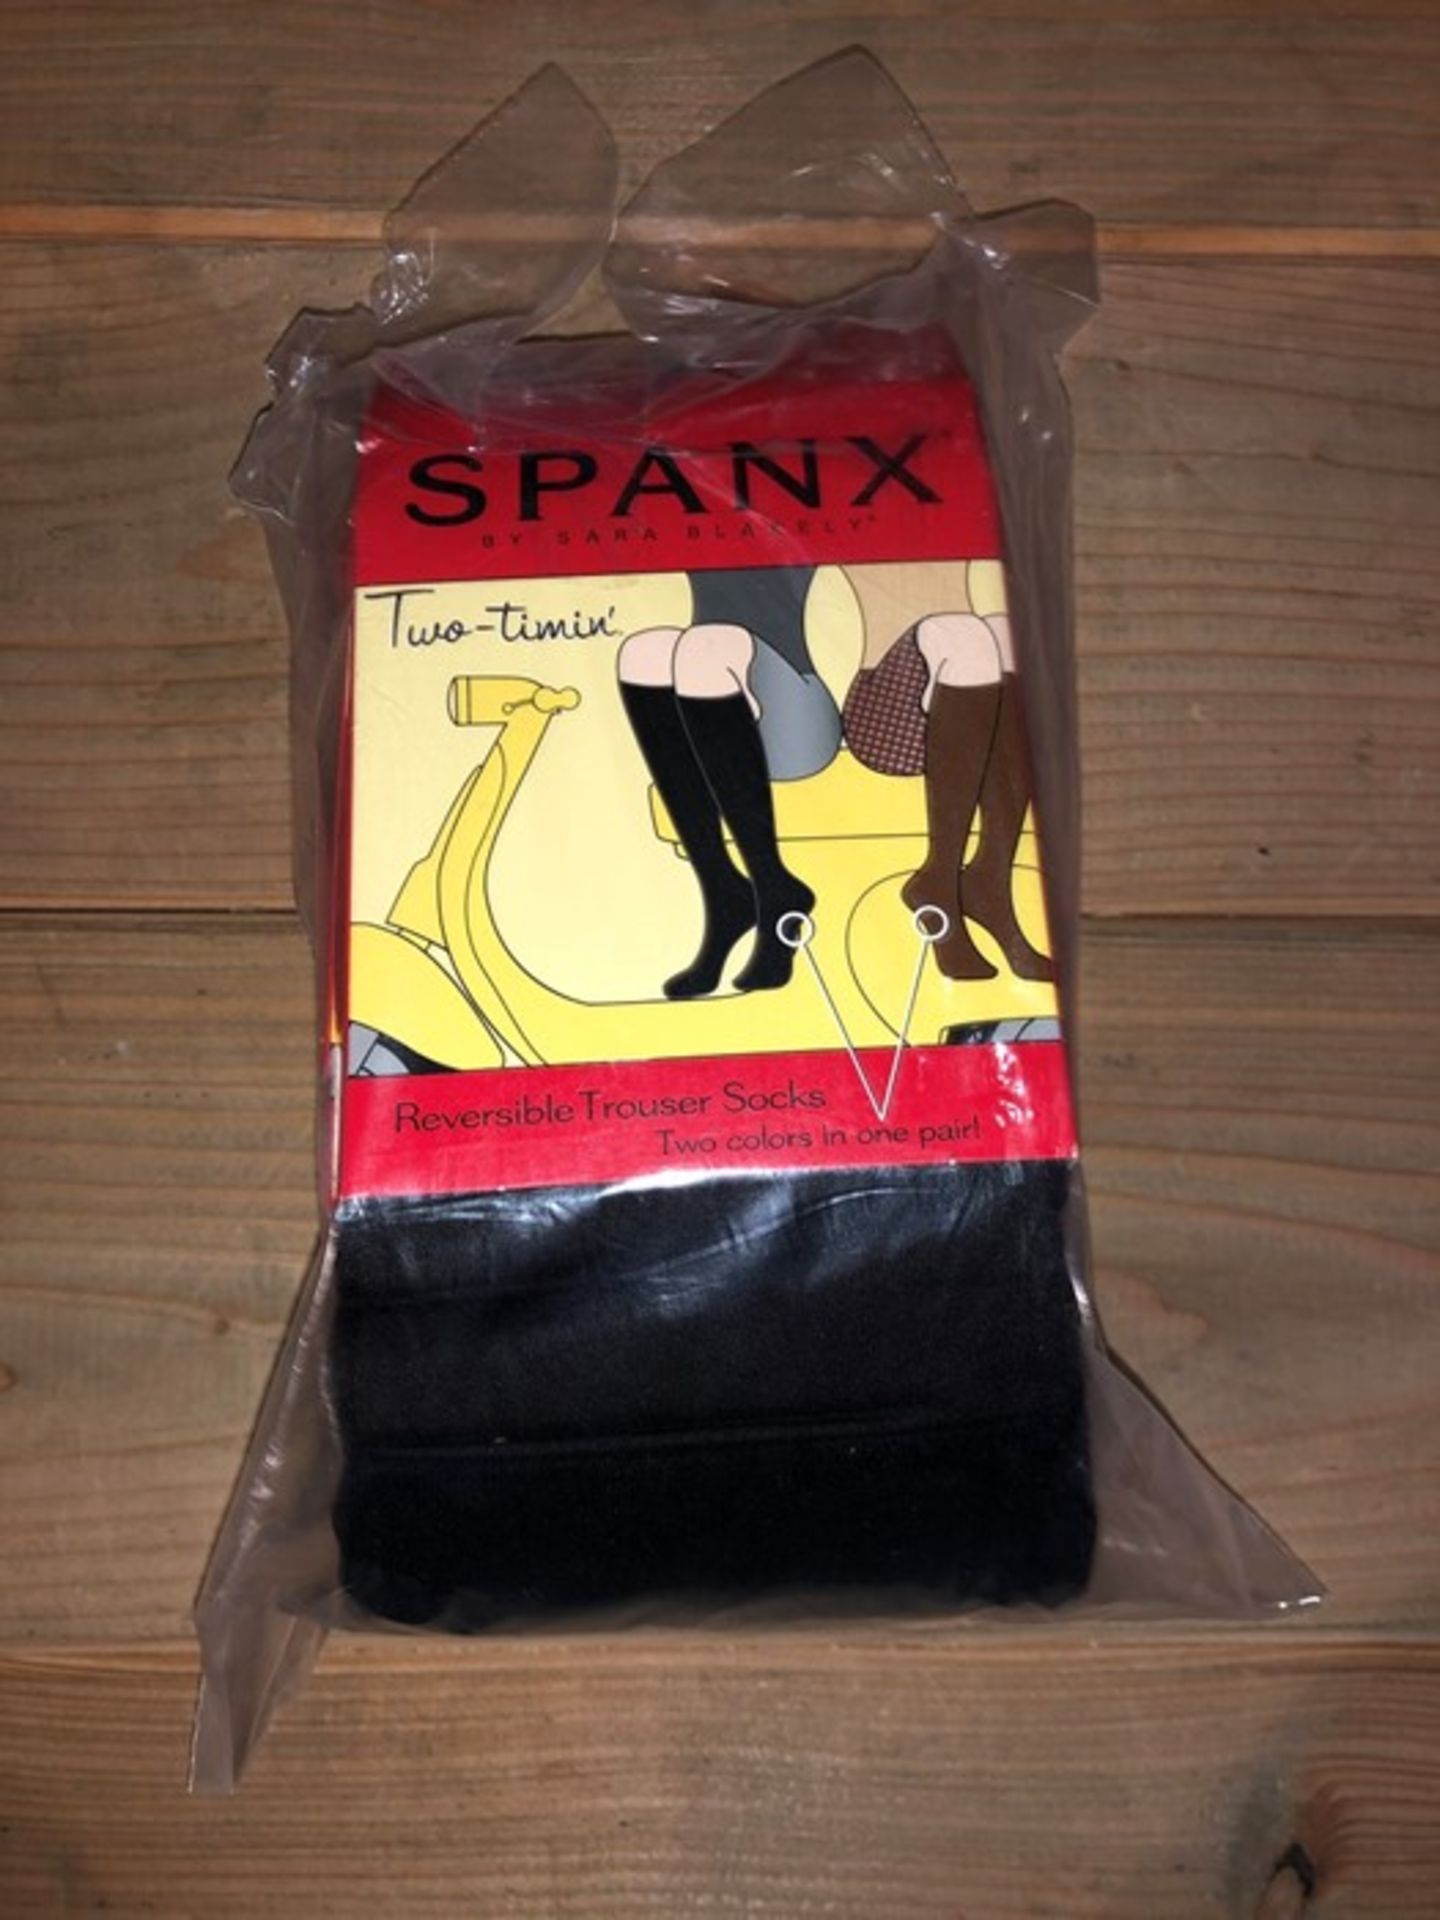 1 LOT TO CONTAIN 10 SPANX SOCKS IN BLACK/MIDNIGHT / SIZE REGULAR / STYLE 012 / RRP £150.00 (PUBLIC